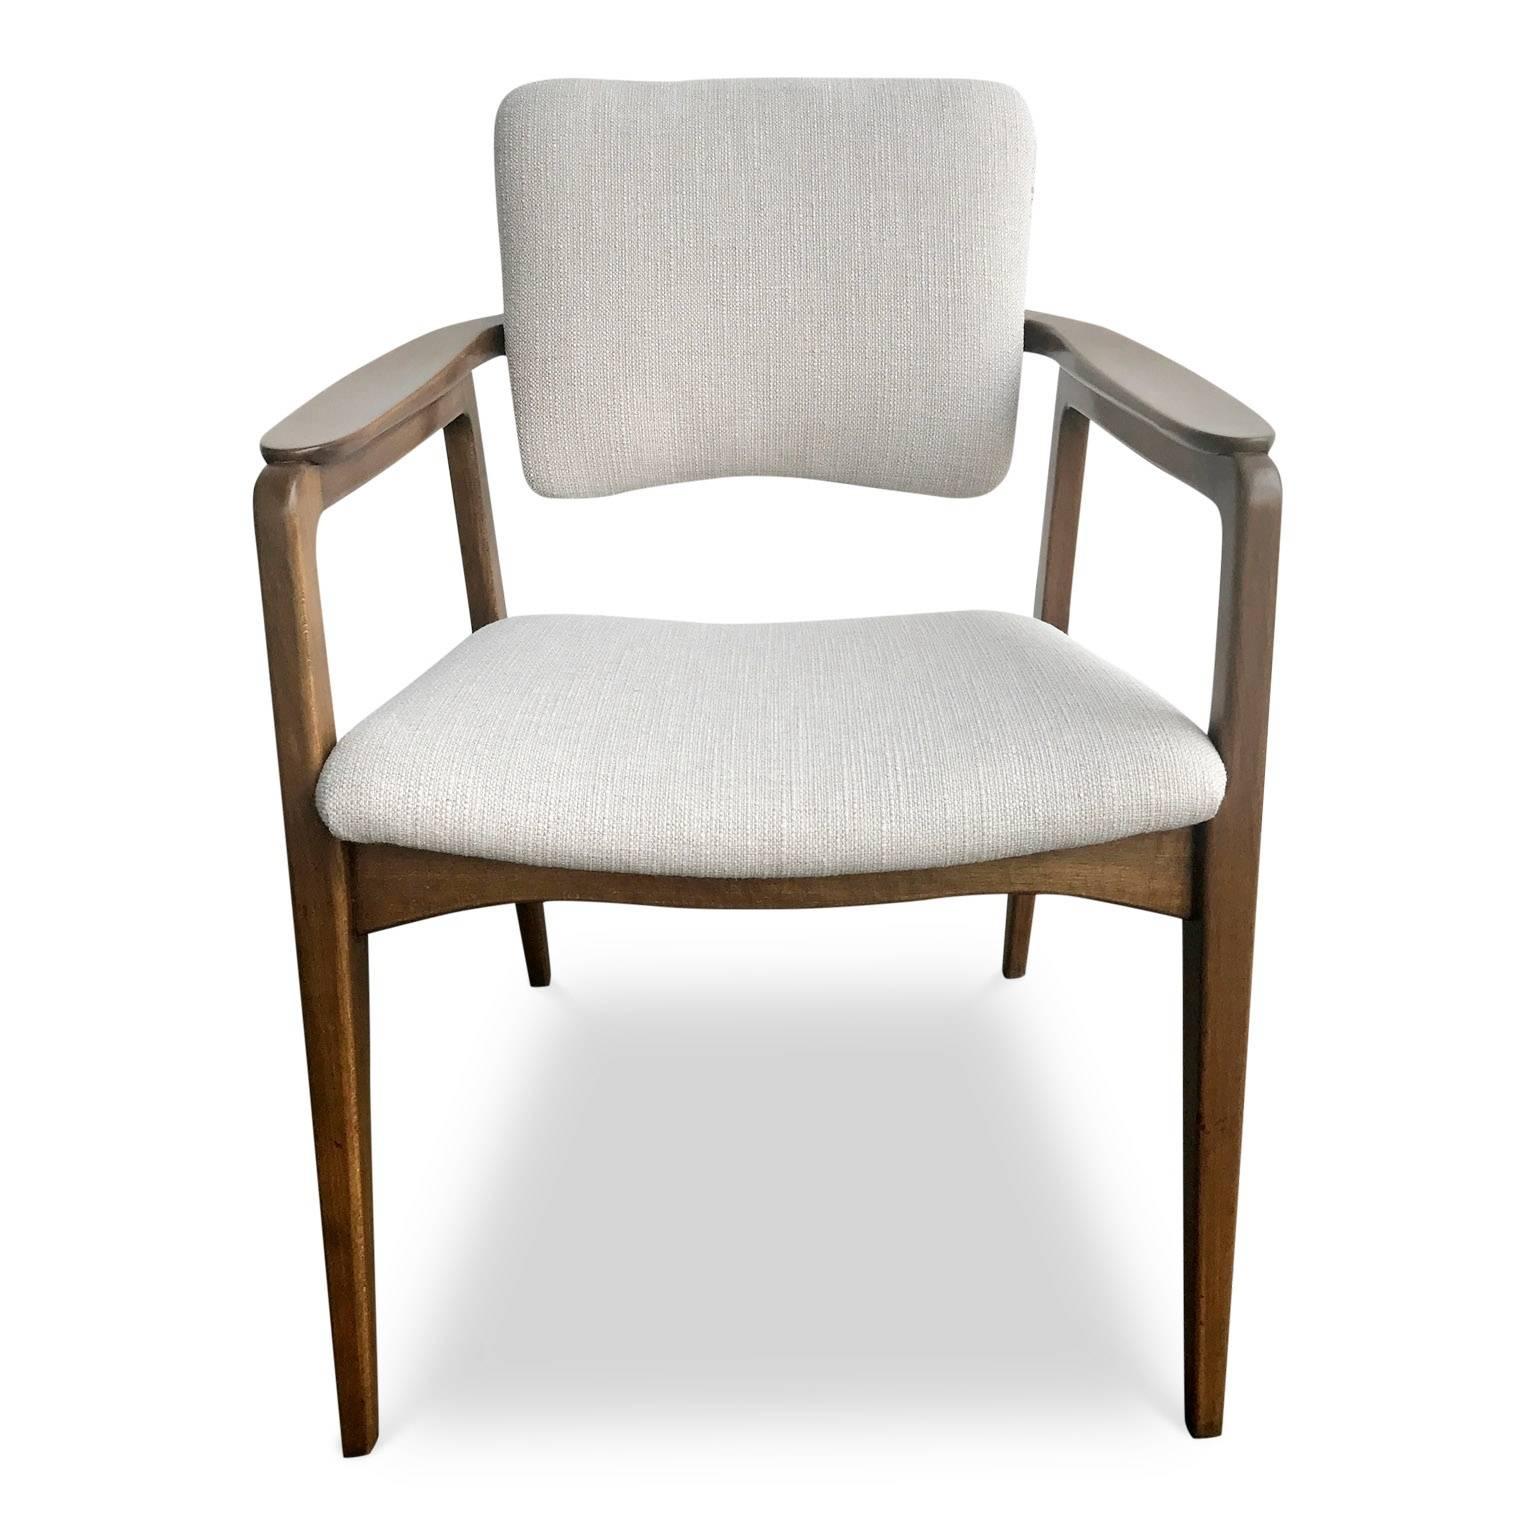 Elegant pair Sigvard Bernadotte tilt back chairs for France and Daverkosen Denmark, distributed by John Stuart. These graceful chairs have been newly restored. The solid teak frames have been refinished in a rich stain and the seats and backs have